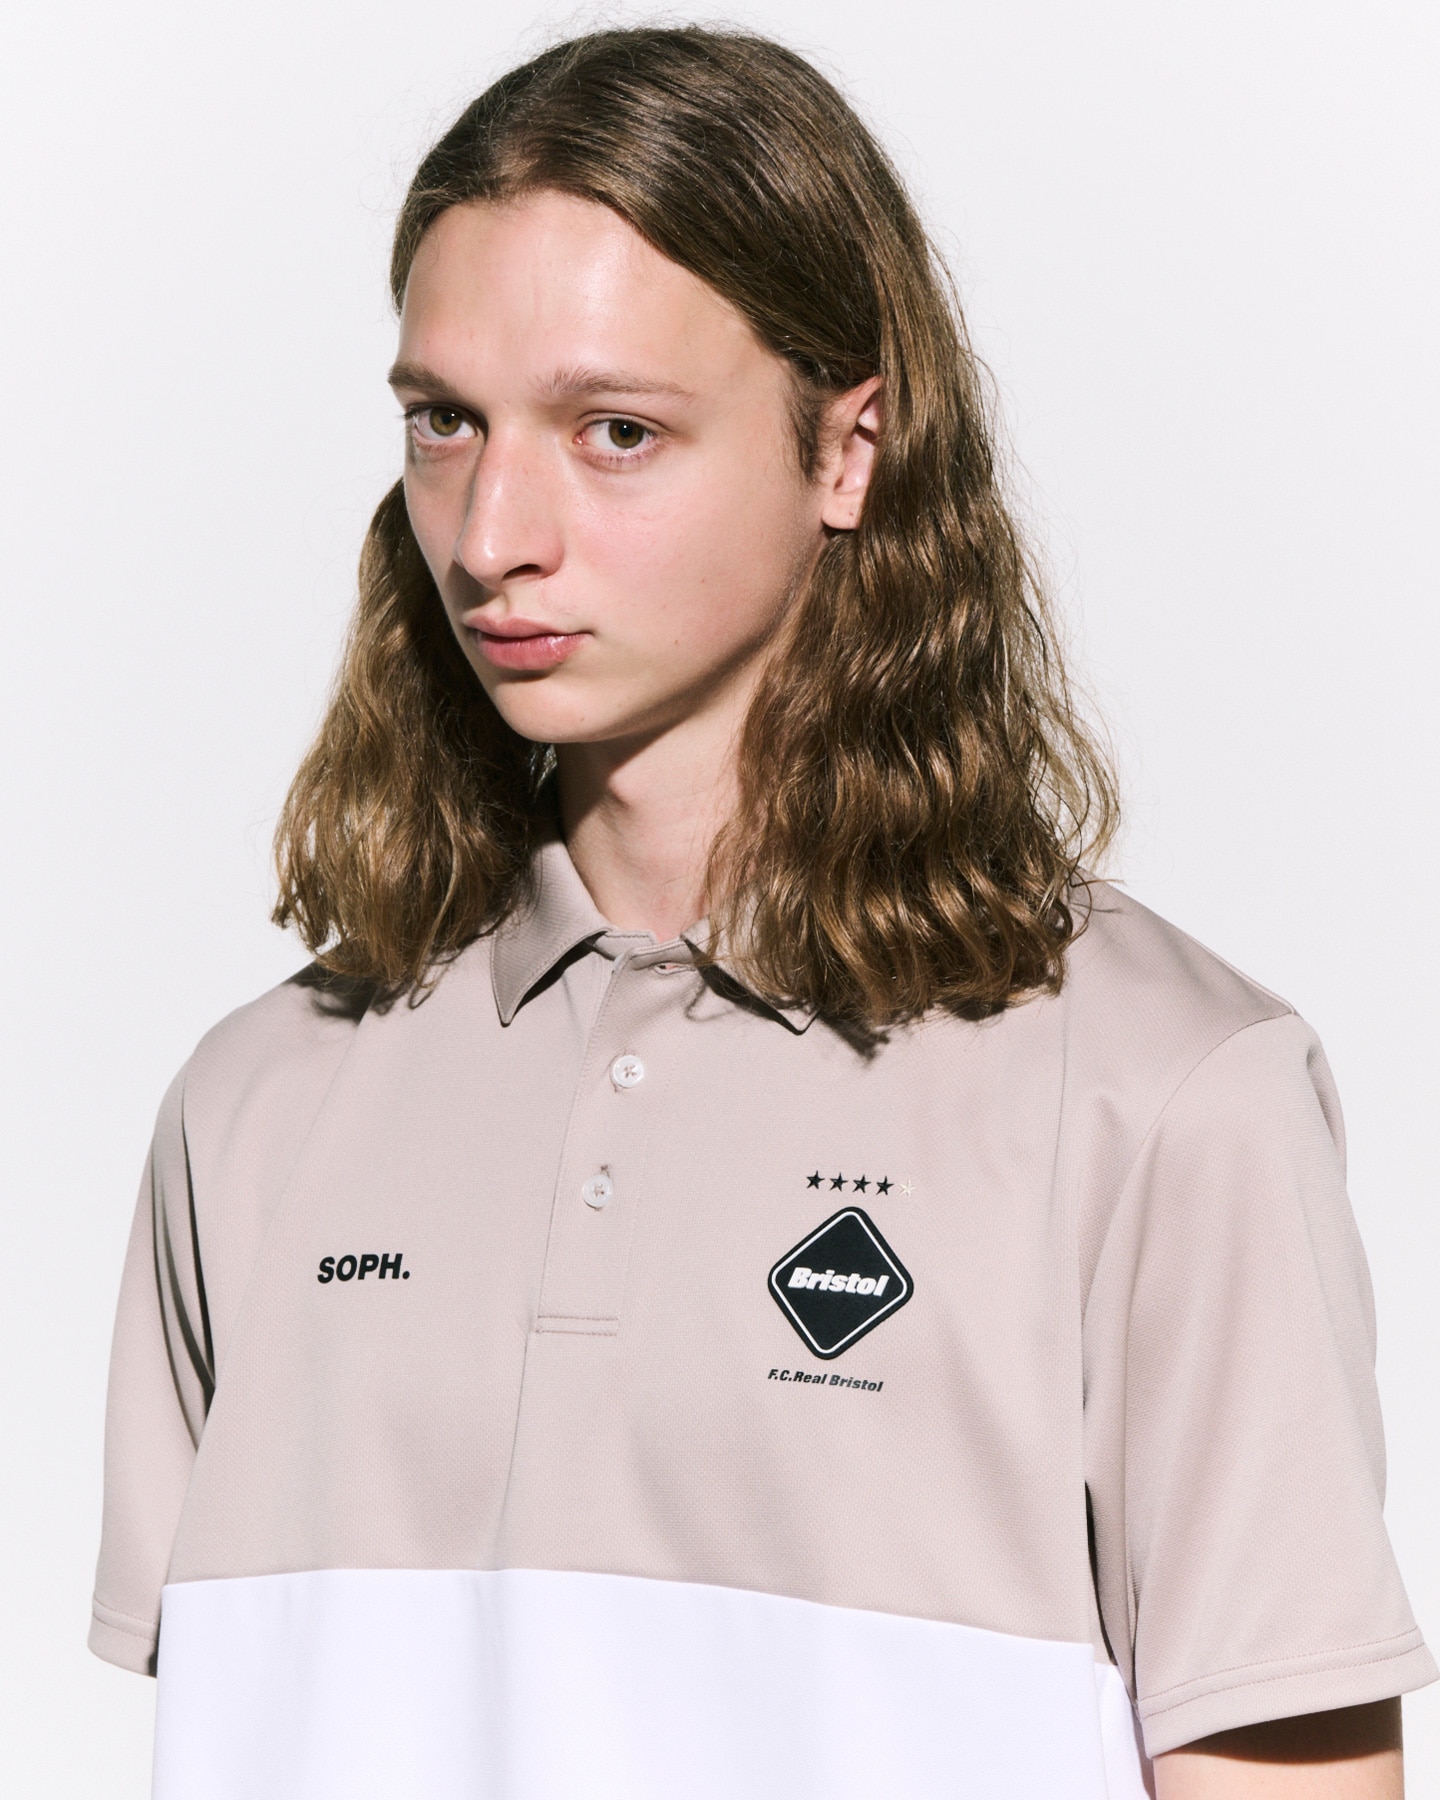 FCRB S/S TEAM POLO  ブリストル　ポロシャツ